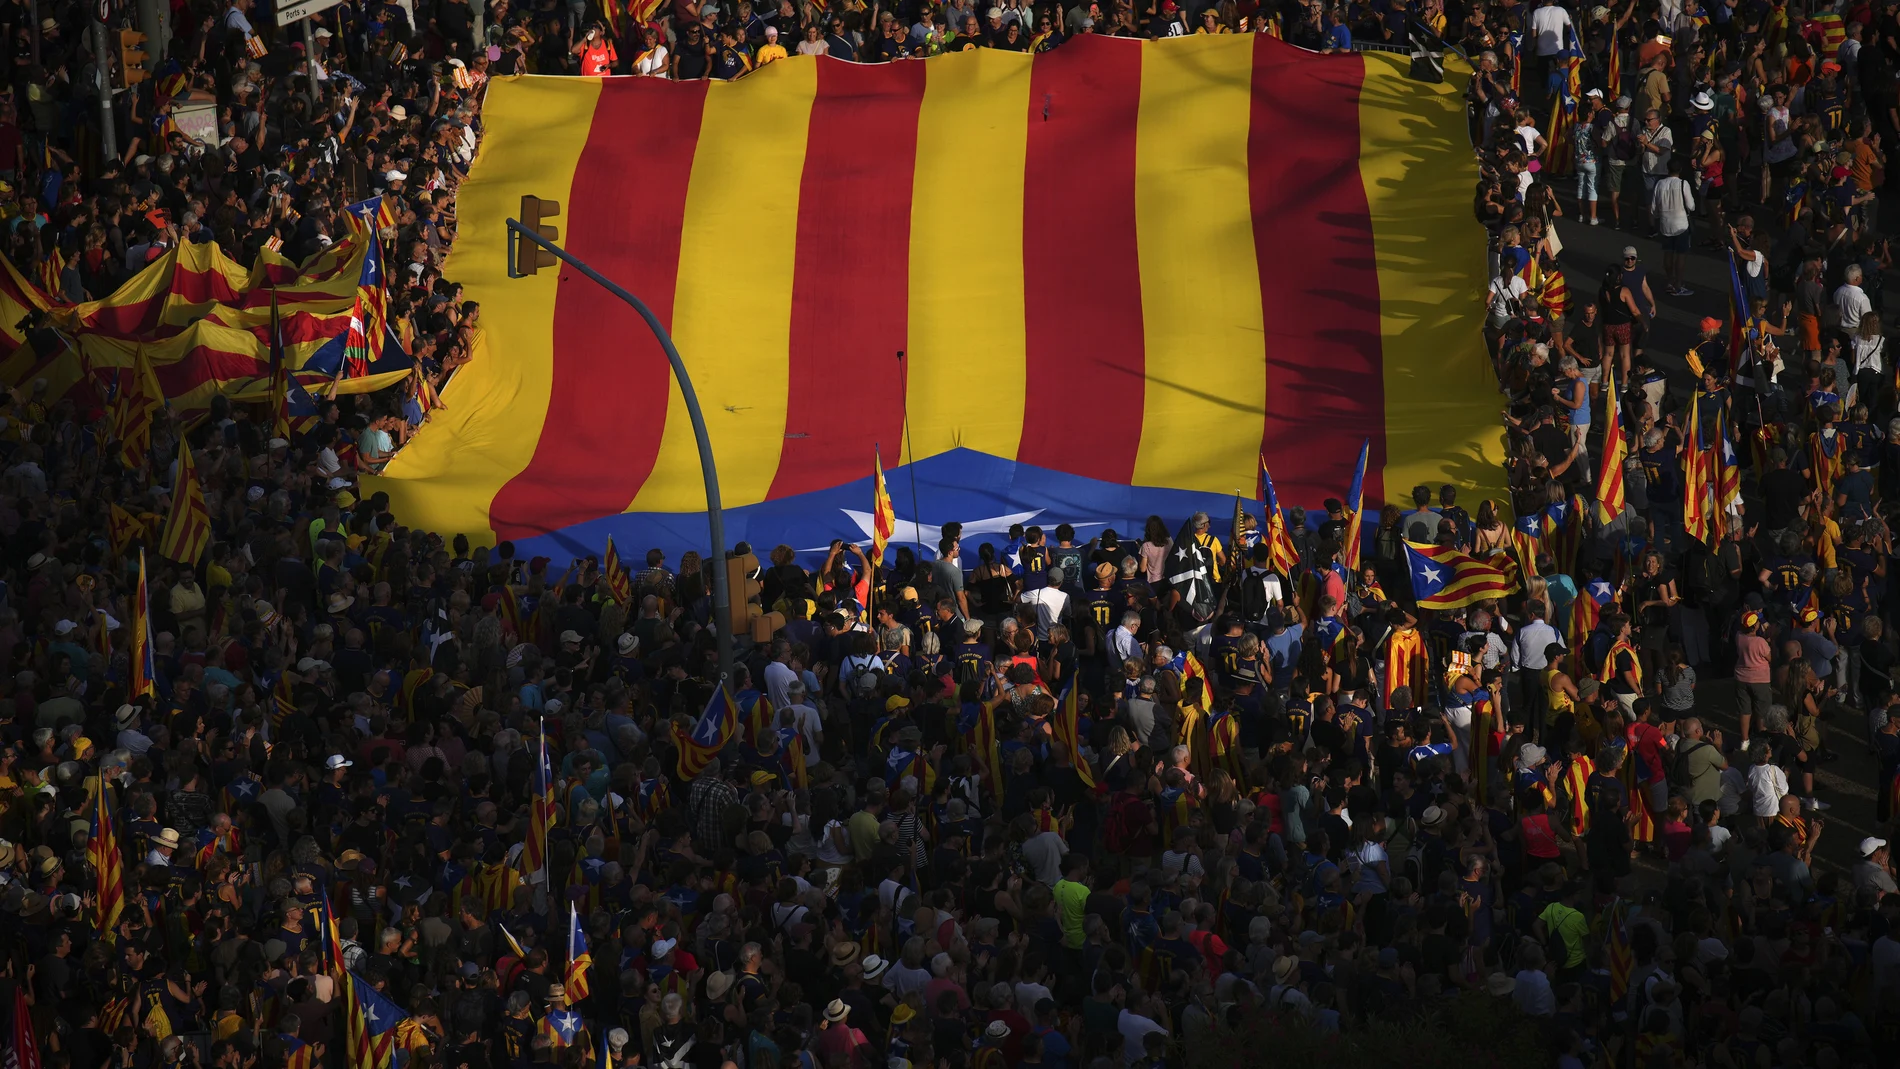 Protesters hold independence flags during a demonstration to celebrate the Catalan National Day in Barcelona, Spain, Monday, Sept. 11, 2023. The traditional September 11, called "Diada", marks the fall of the Catalan capital to Spanish forces in 1714.